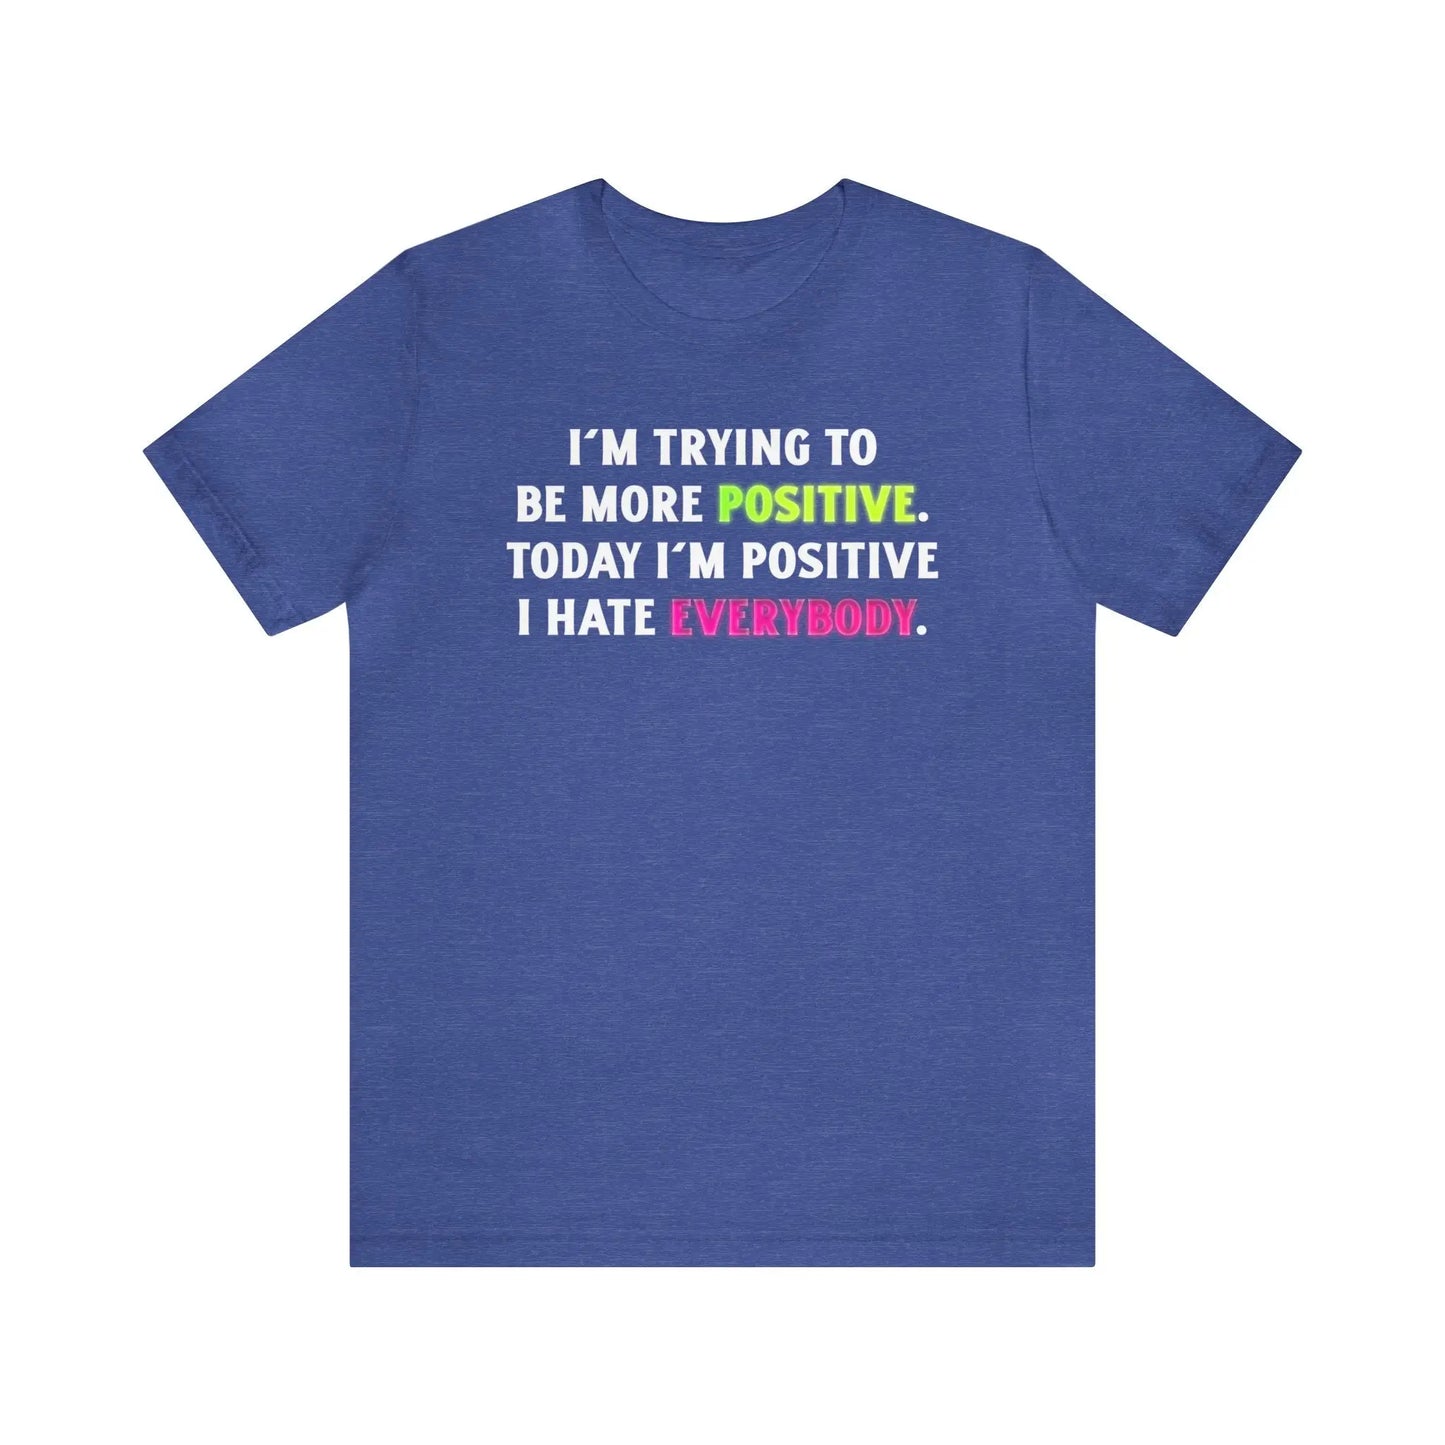 I'm Trying To Be More Positive Men's Tee - Wicked Tees